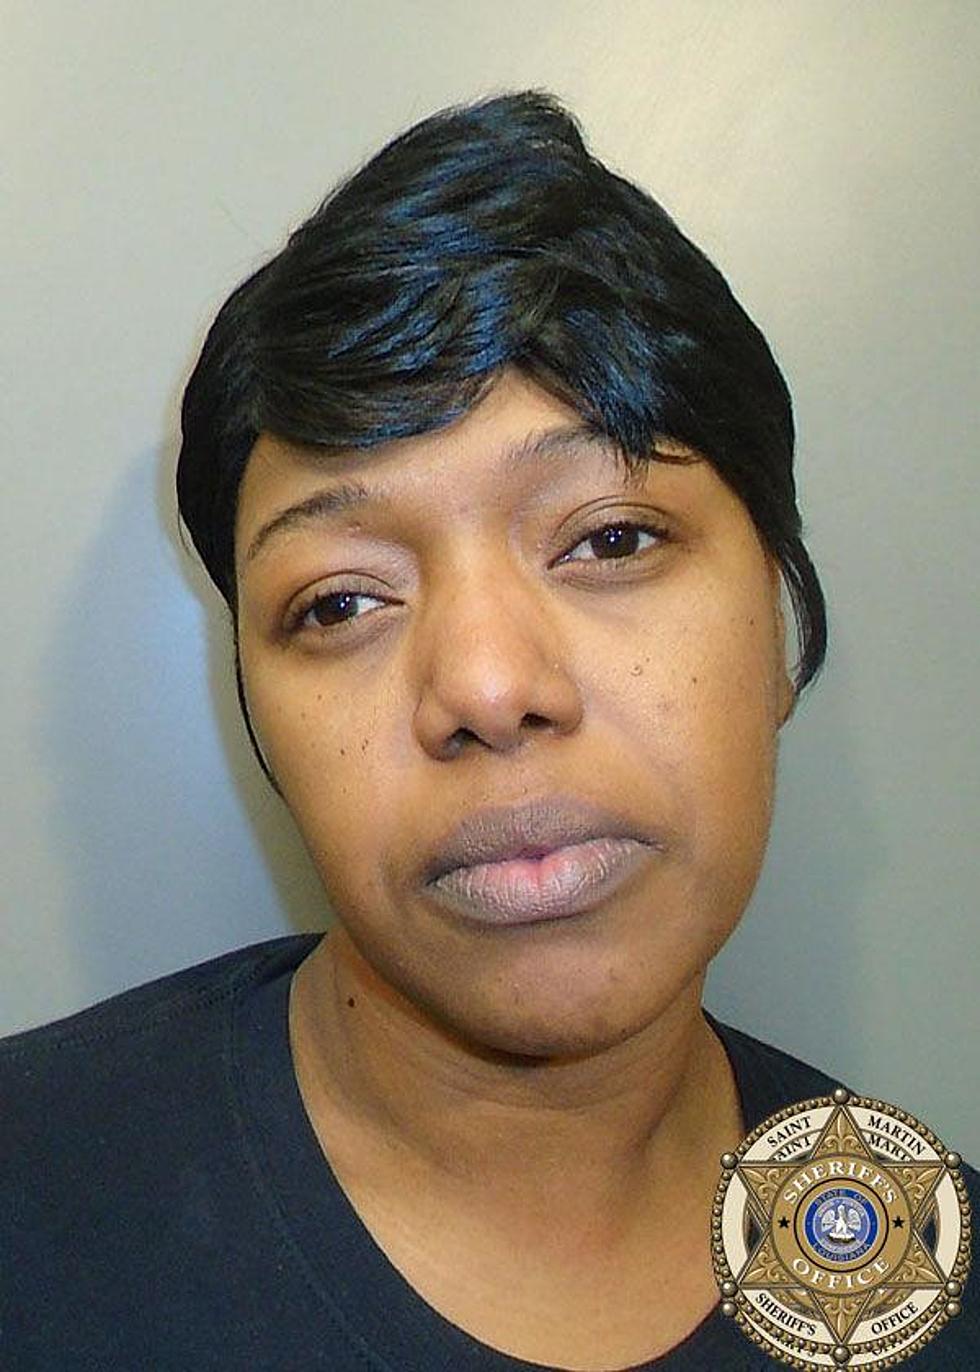 Louisiana Mother Arrested After Leaving Kids In The Car While Gambling